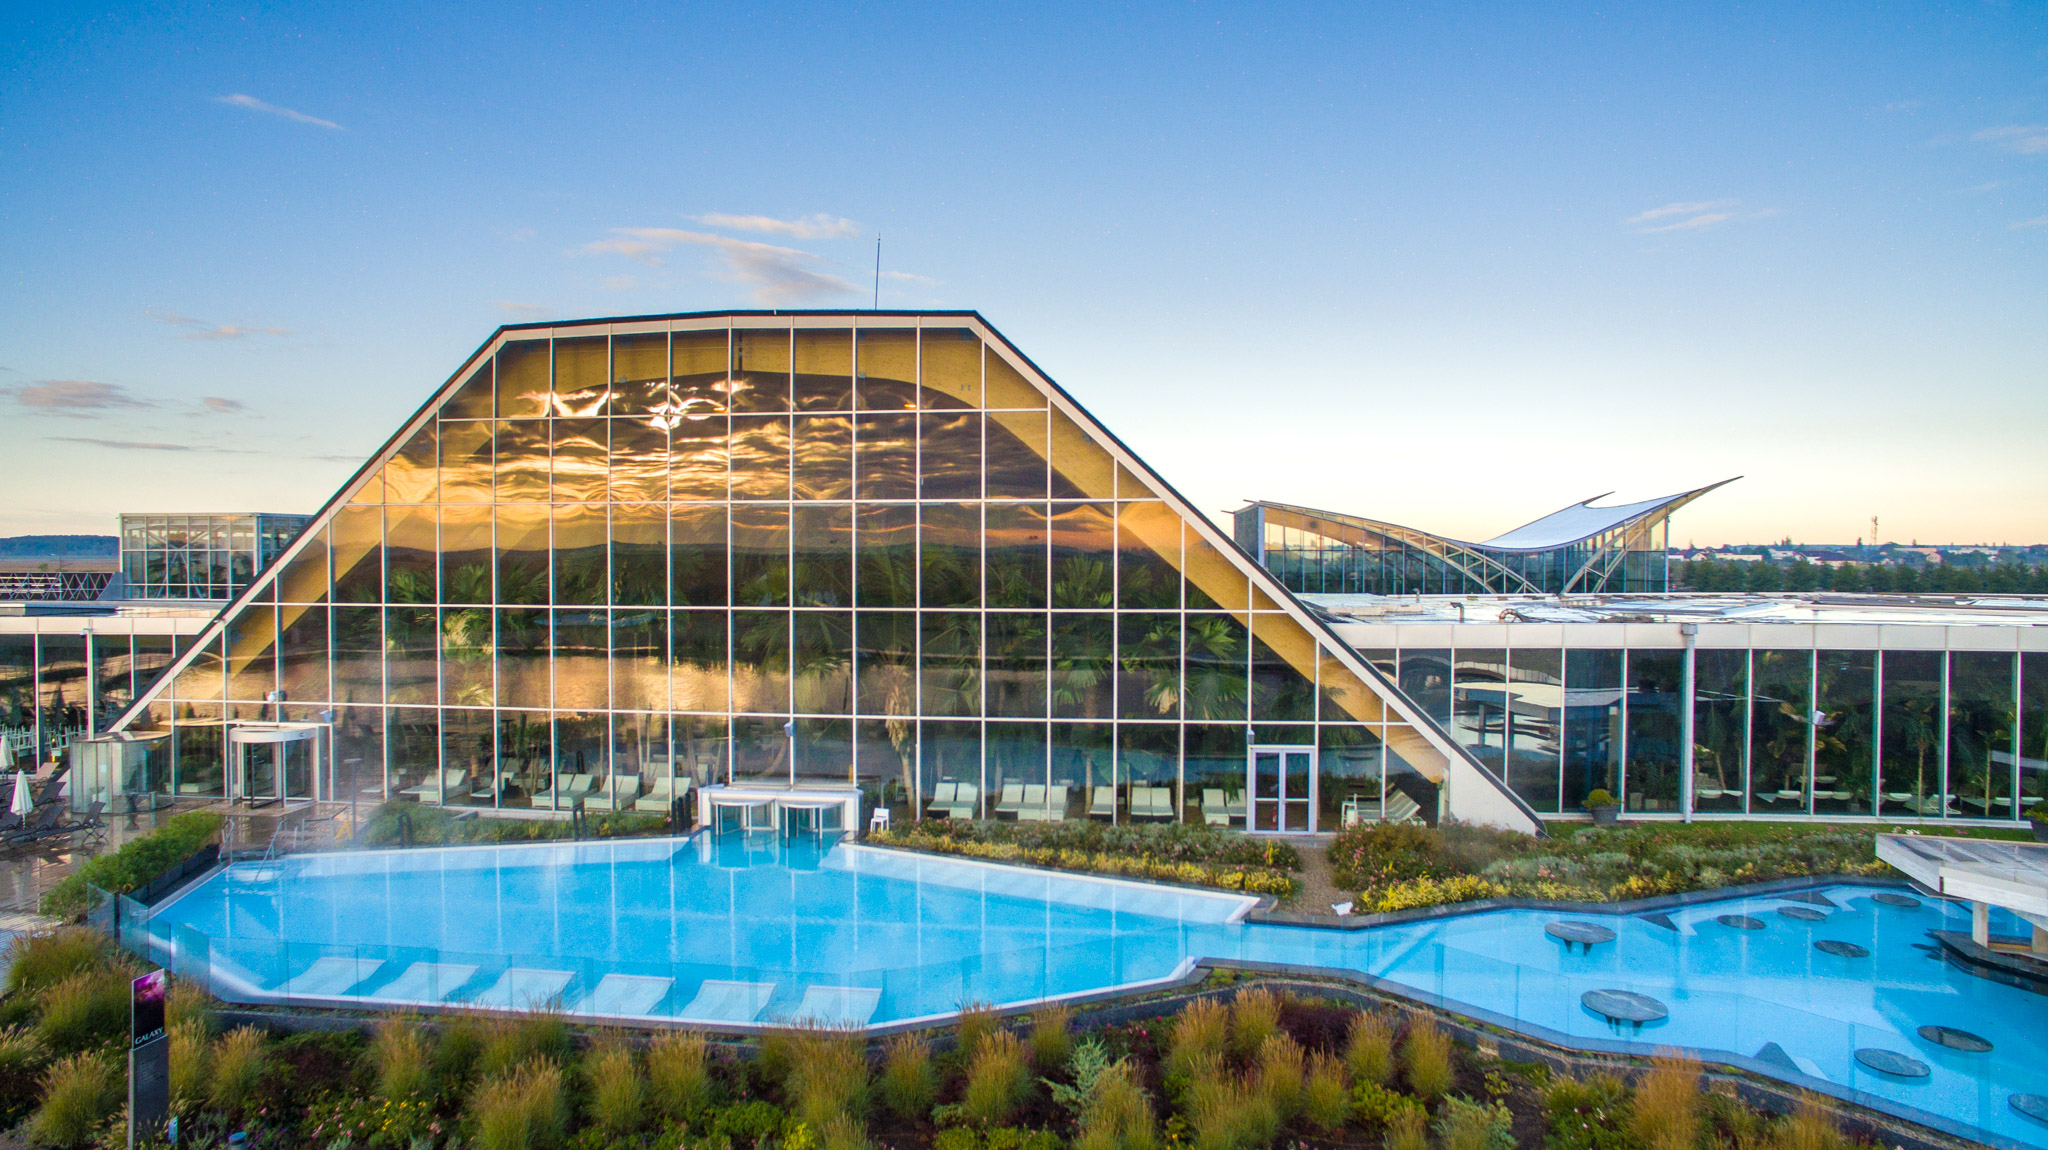 Therme Group: Sustainable Water Treatment, Inspired by Nature